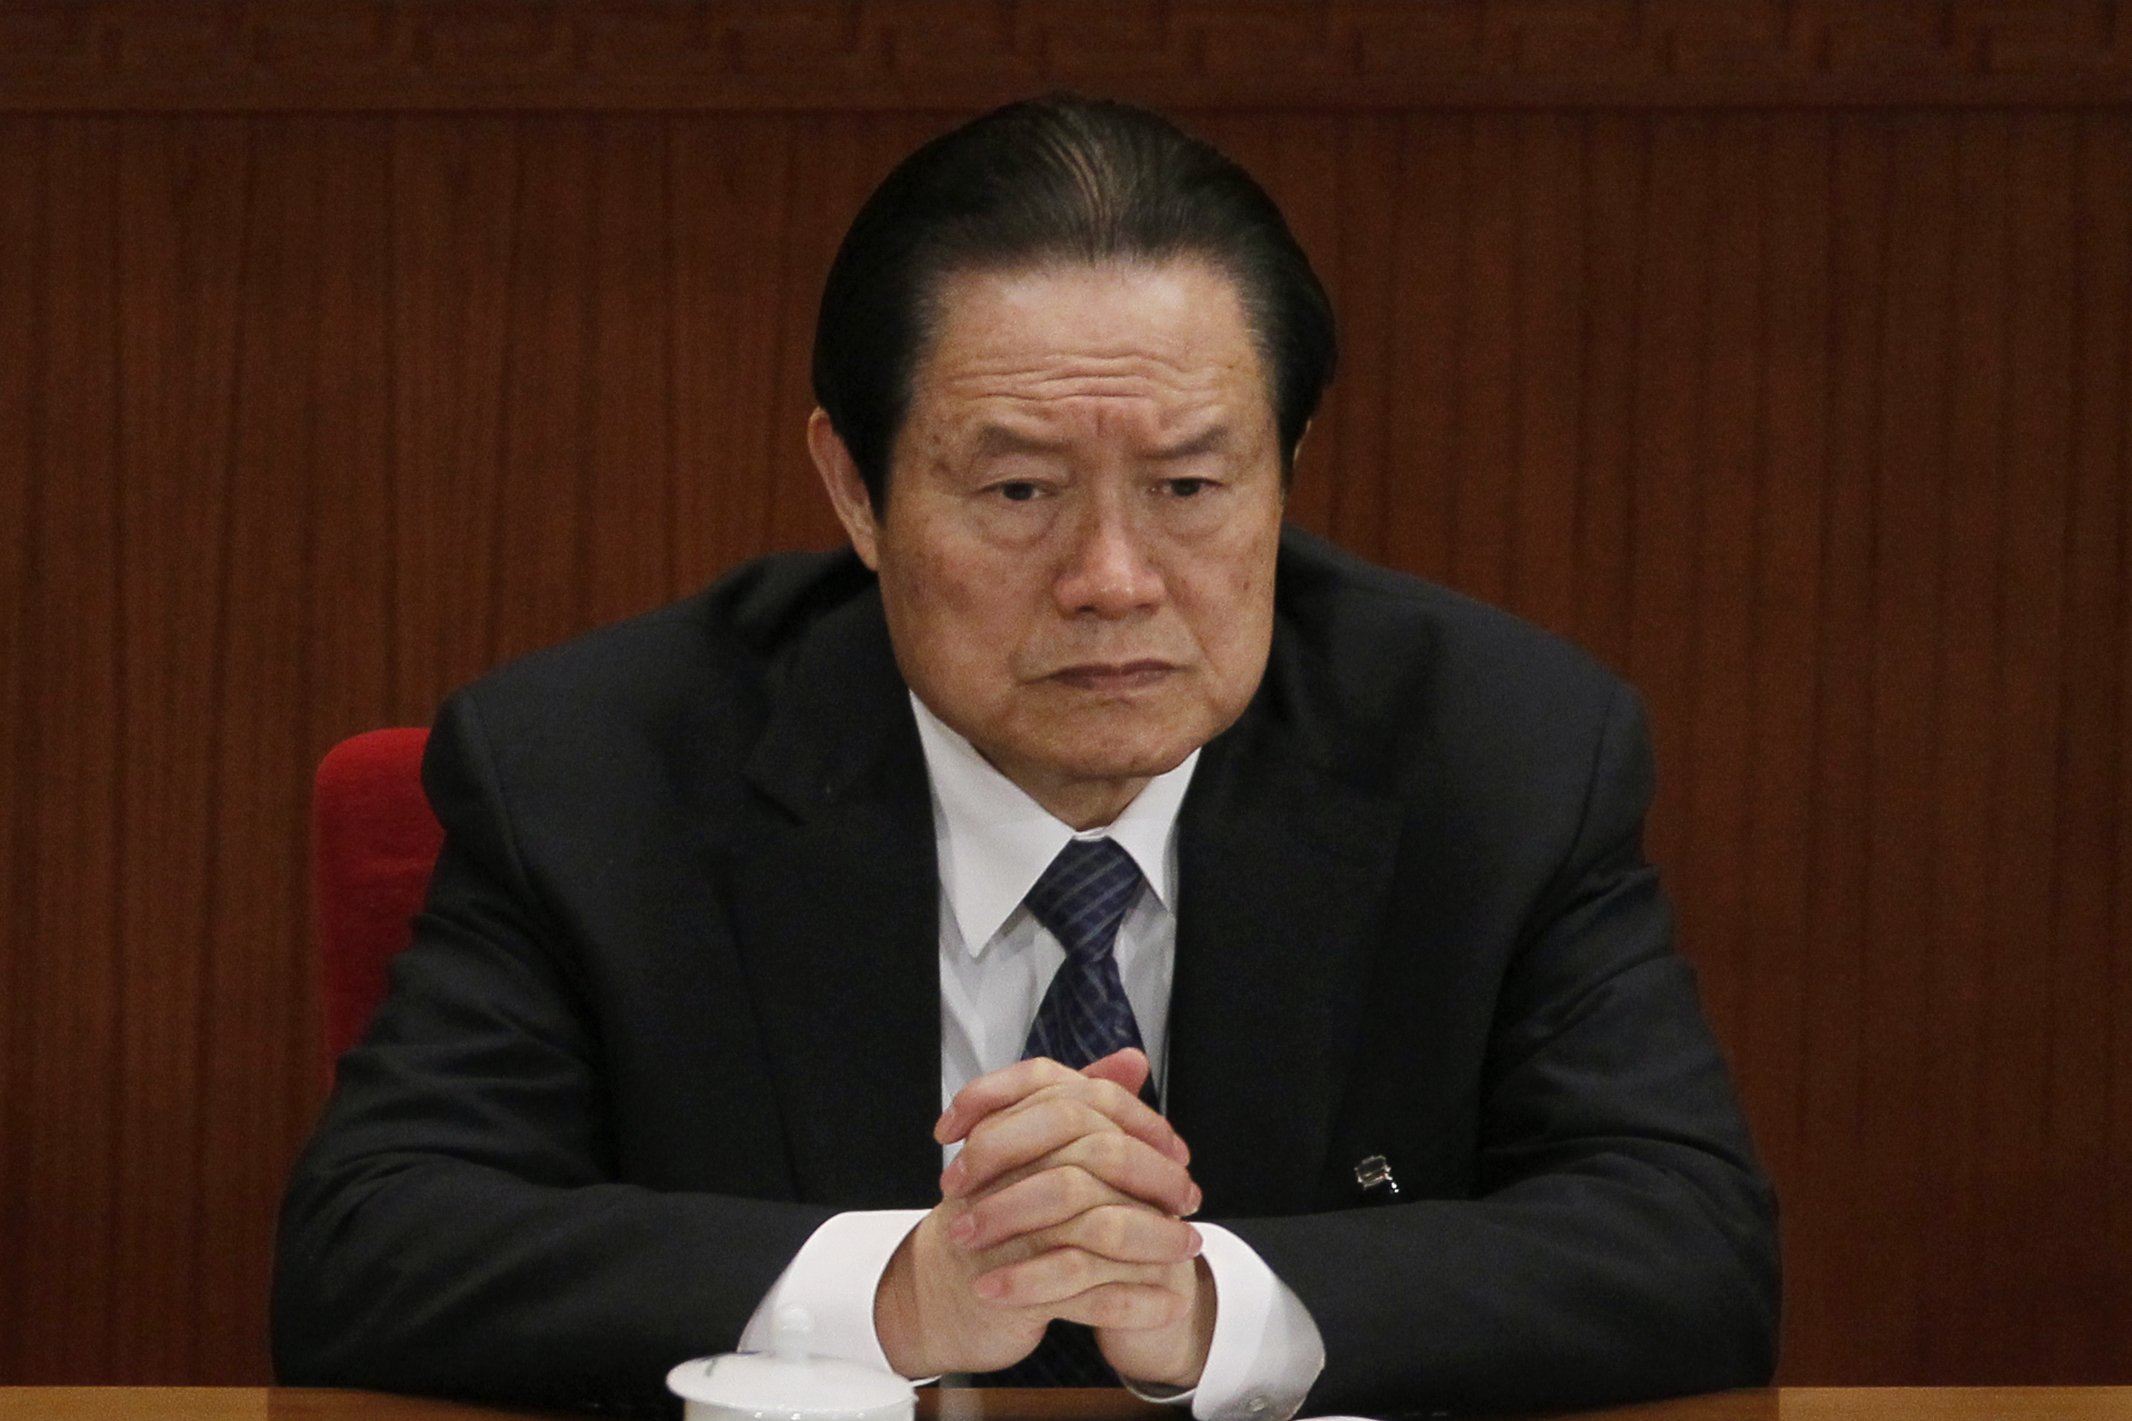 Zhou Yongkang, then Chinese Communist Party Politburo Standing Committee member in charge of security, attends a plenary session of the National People's Congress at the Great Hall of the People in Beijing on March 9, 2012 (Ng Han Guan—AP)